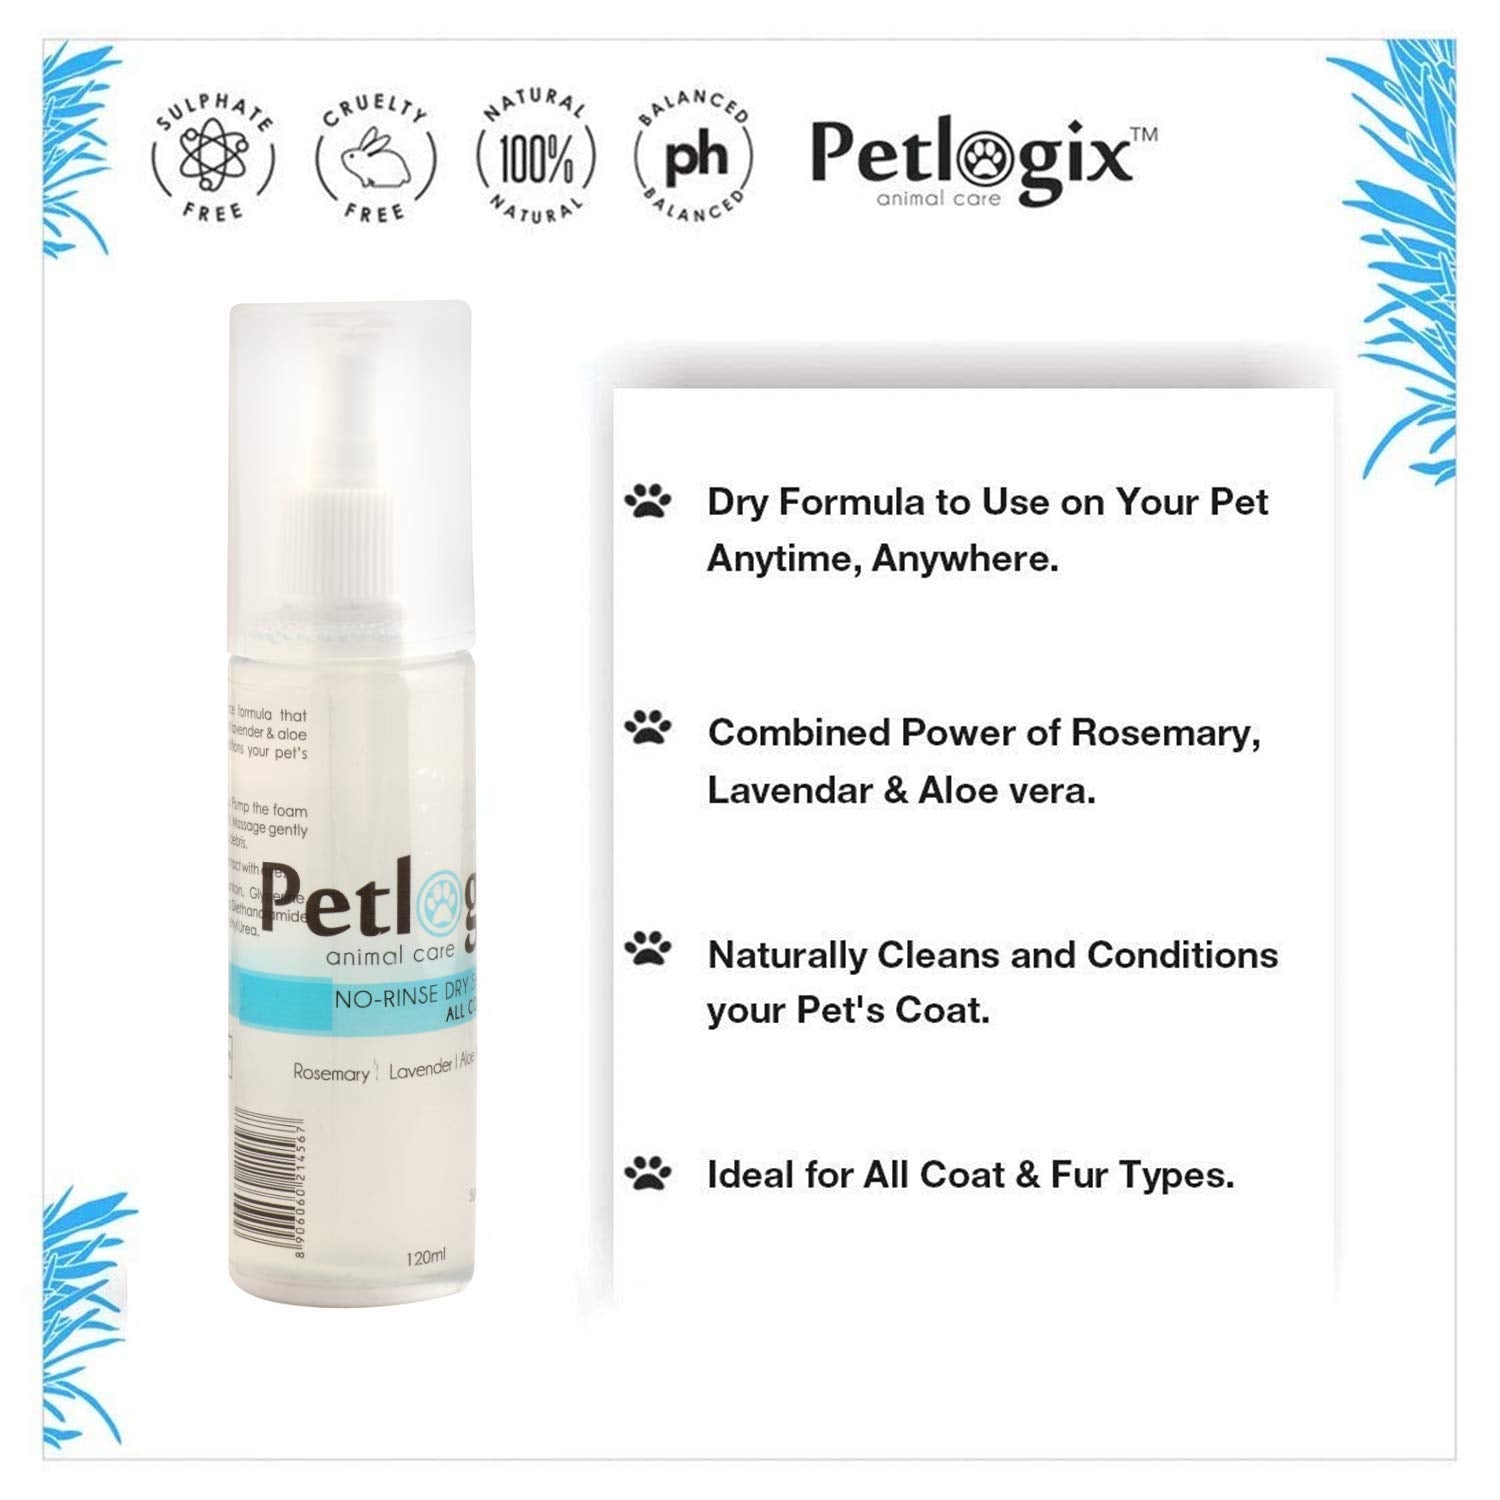 Petlogix No Rinse Dry Shampoo with Signature Fragrance for Dogs and Cats - 120ml